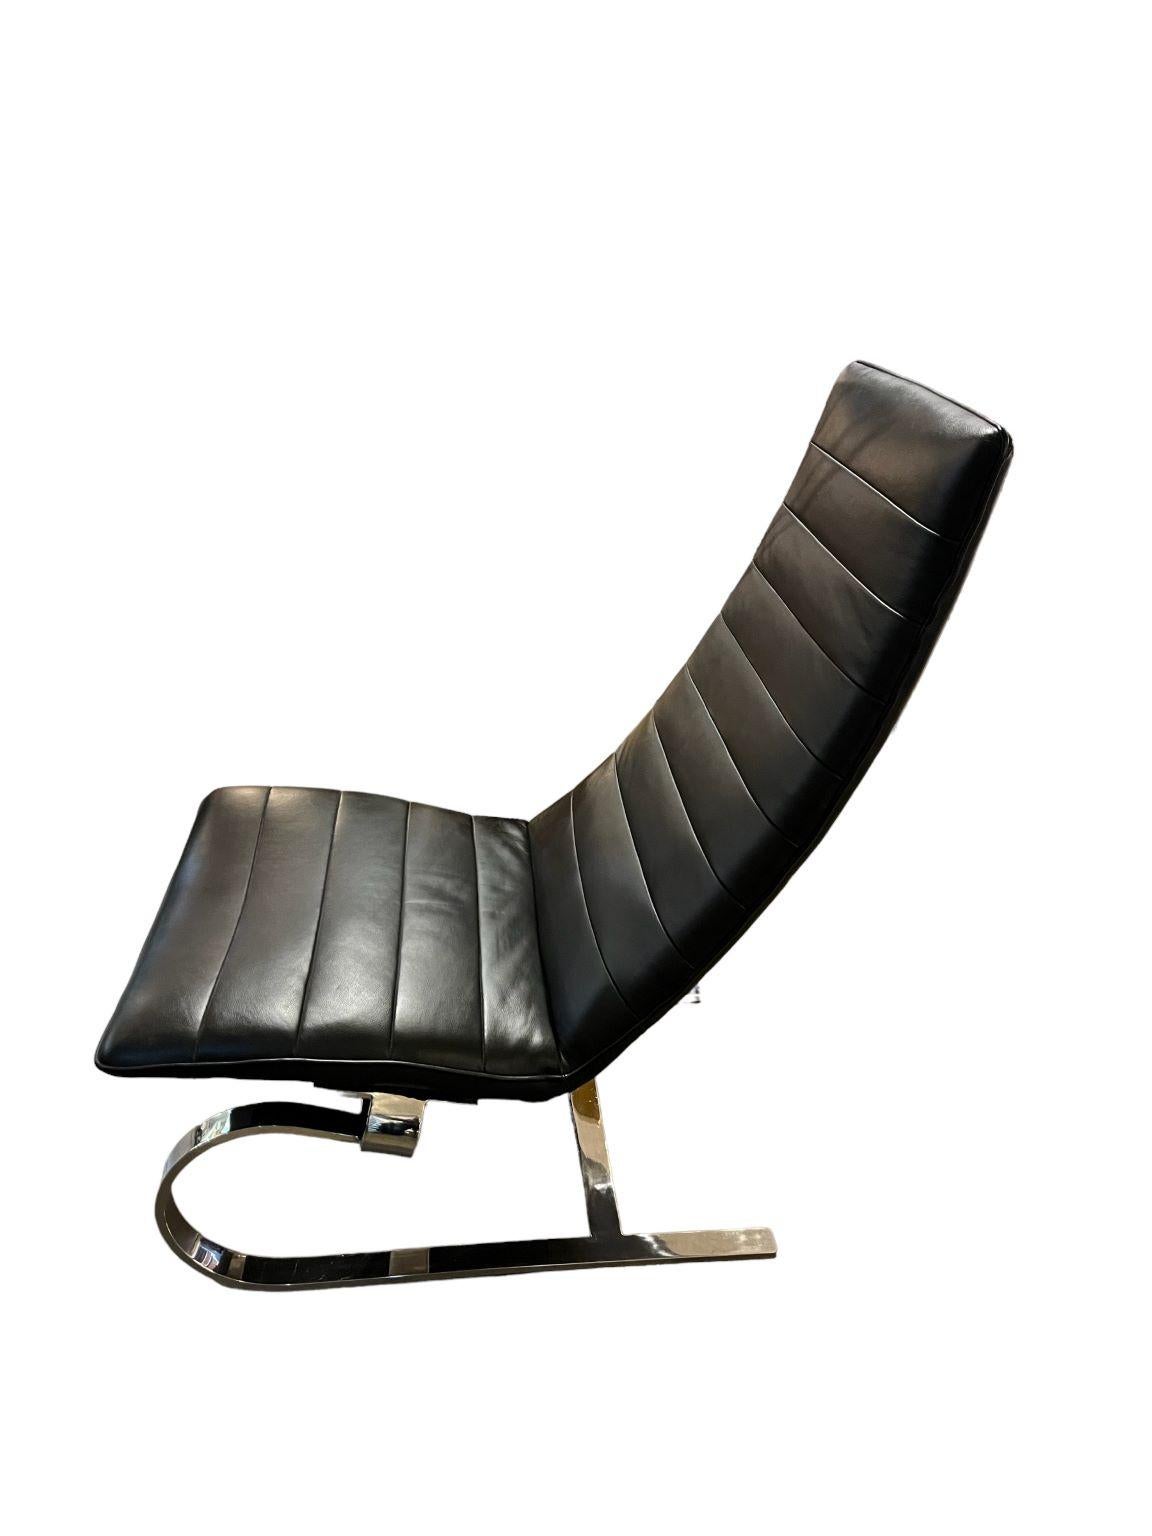 Mid-Century Modern Chrome And Black Leather Modernist Chair In The Style Of Poul Kjaerholm